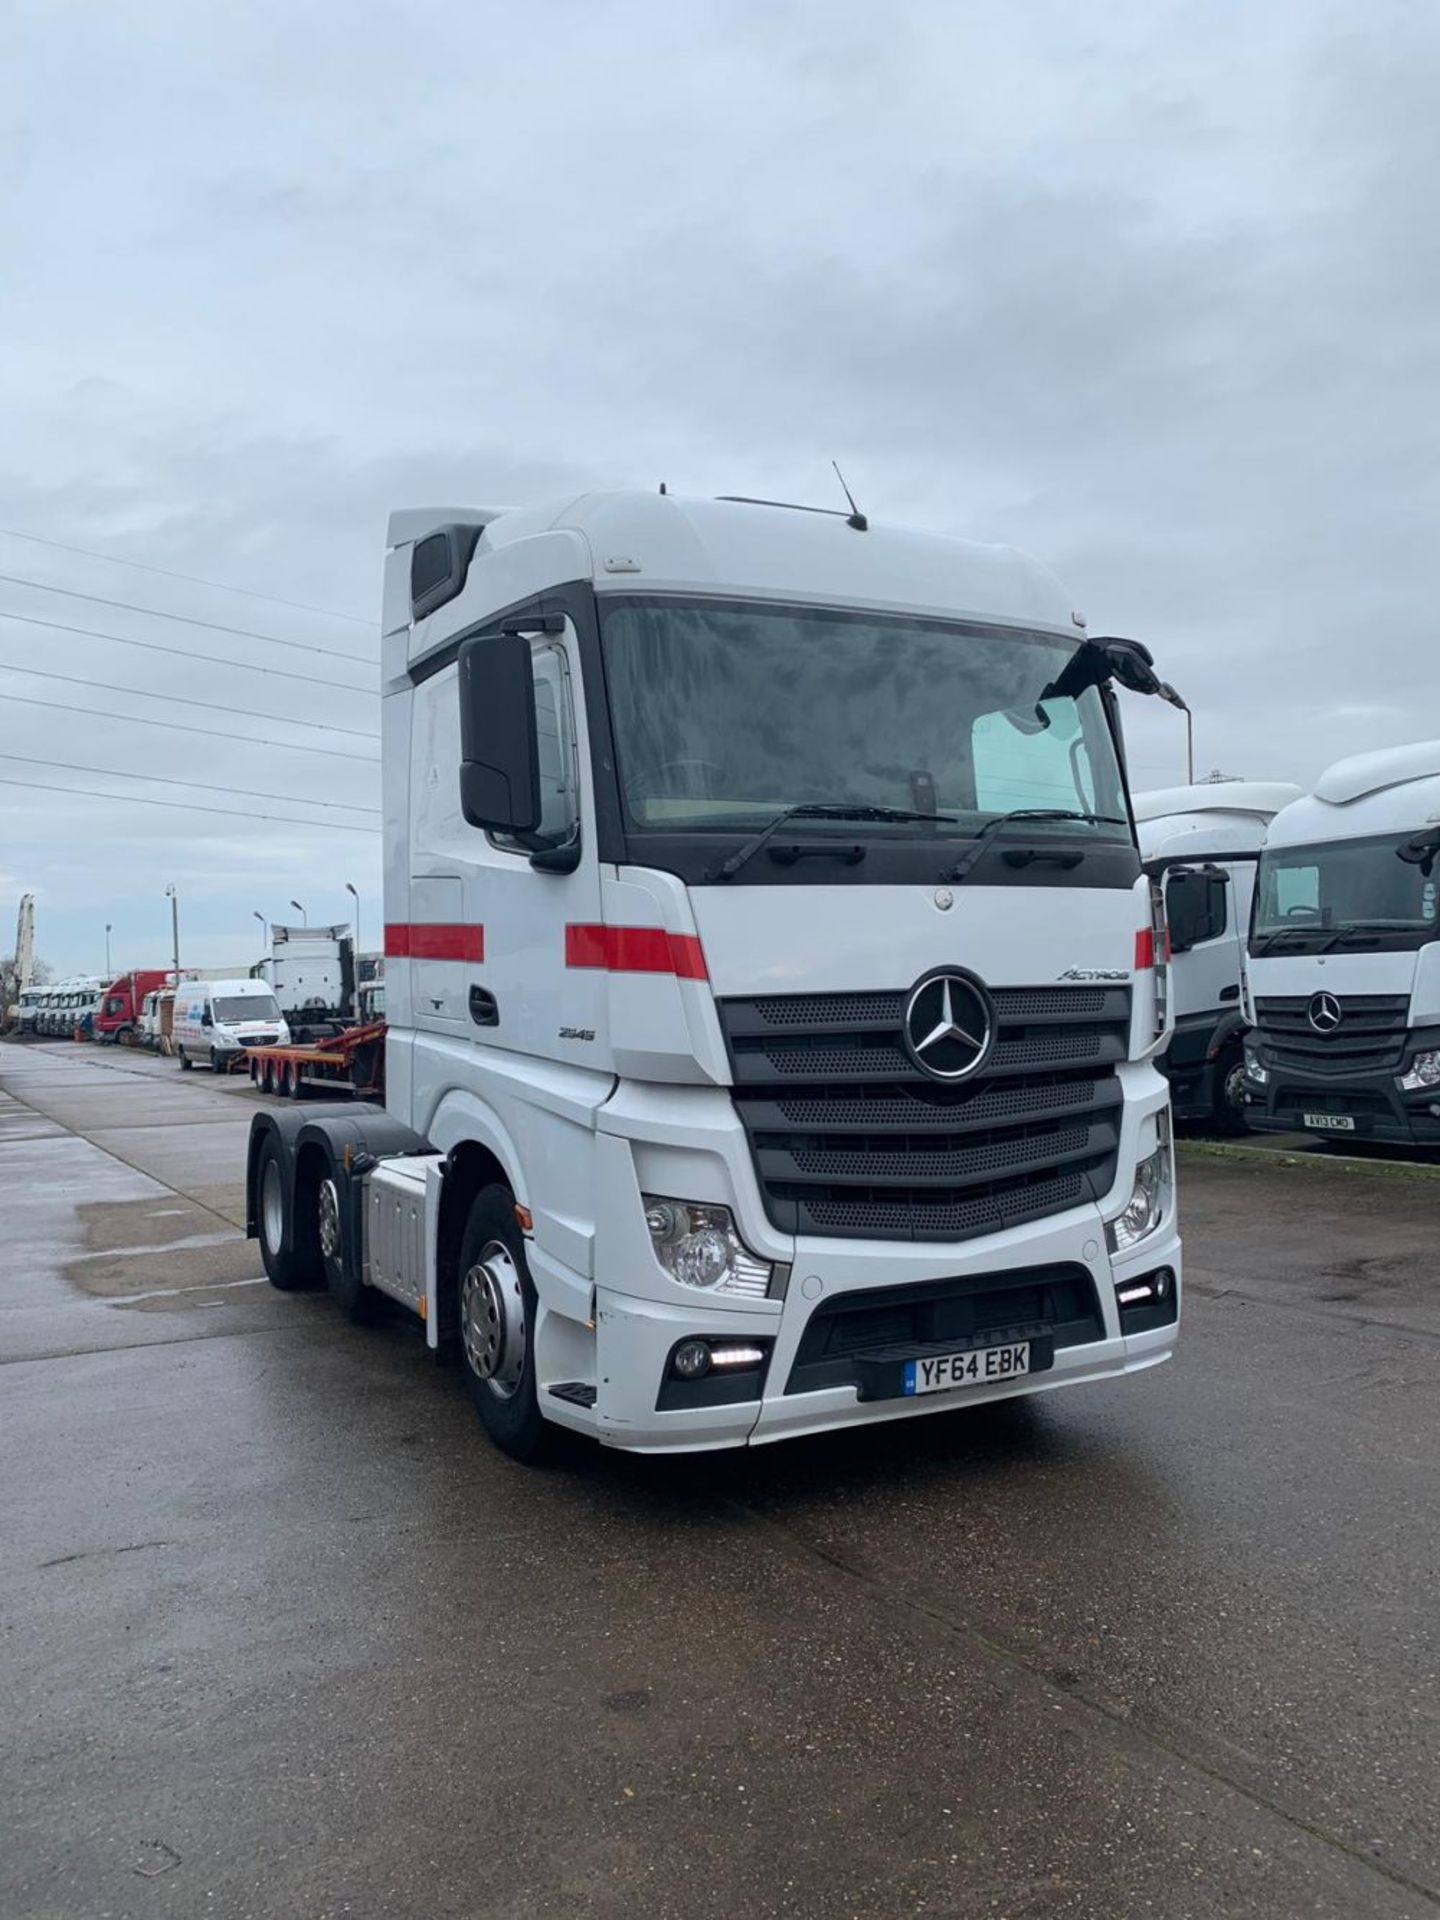 63 Mercedes Actros 1842 - Image 3 of 9